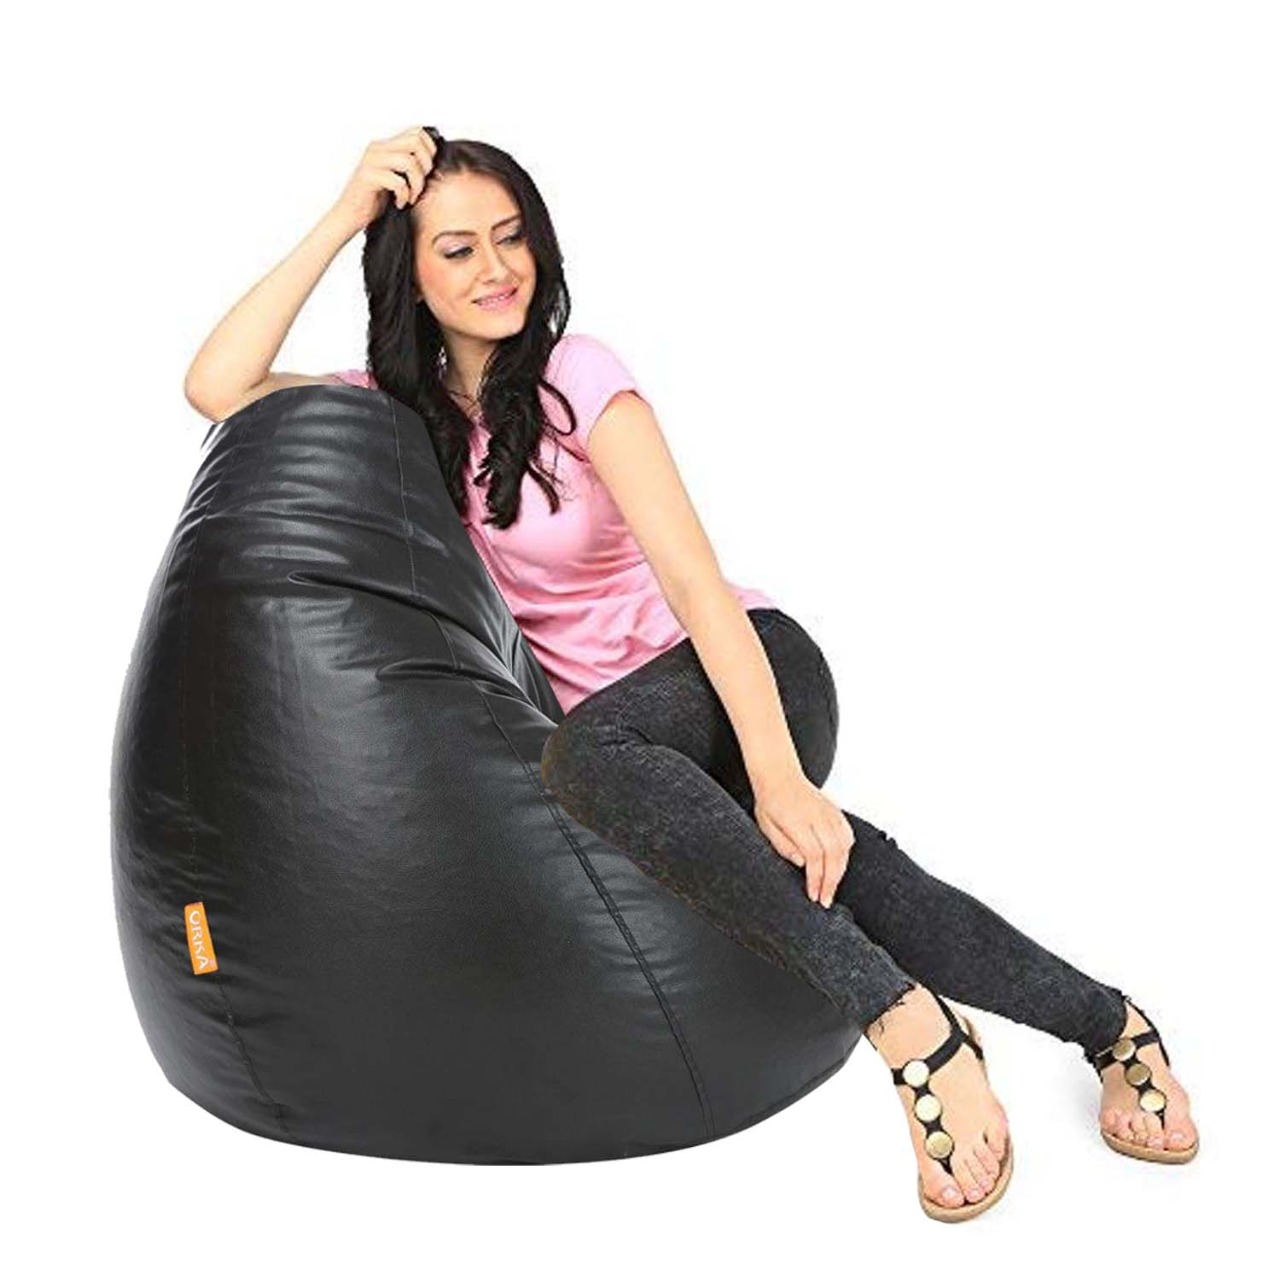 Buy Ink Craft Bean Bag Cover, 6Ft, Pv Velvet Brown Roundbean Bag Chairs (No  Filler) - Comfy Big Bean Bag Chair Covers For Kids, Teens, & Adults - Cover  Only Online at